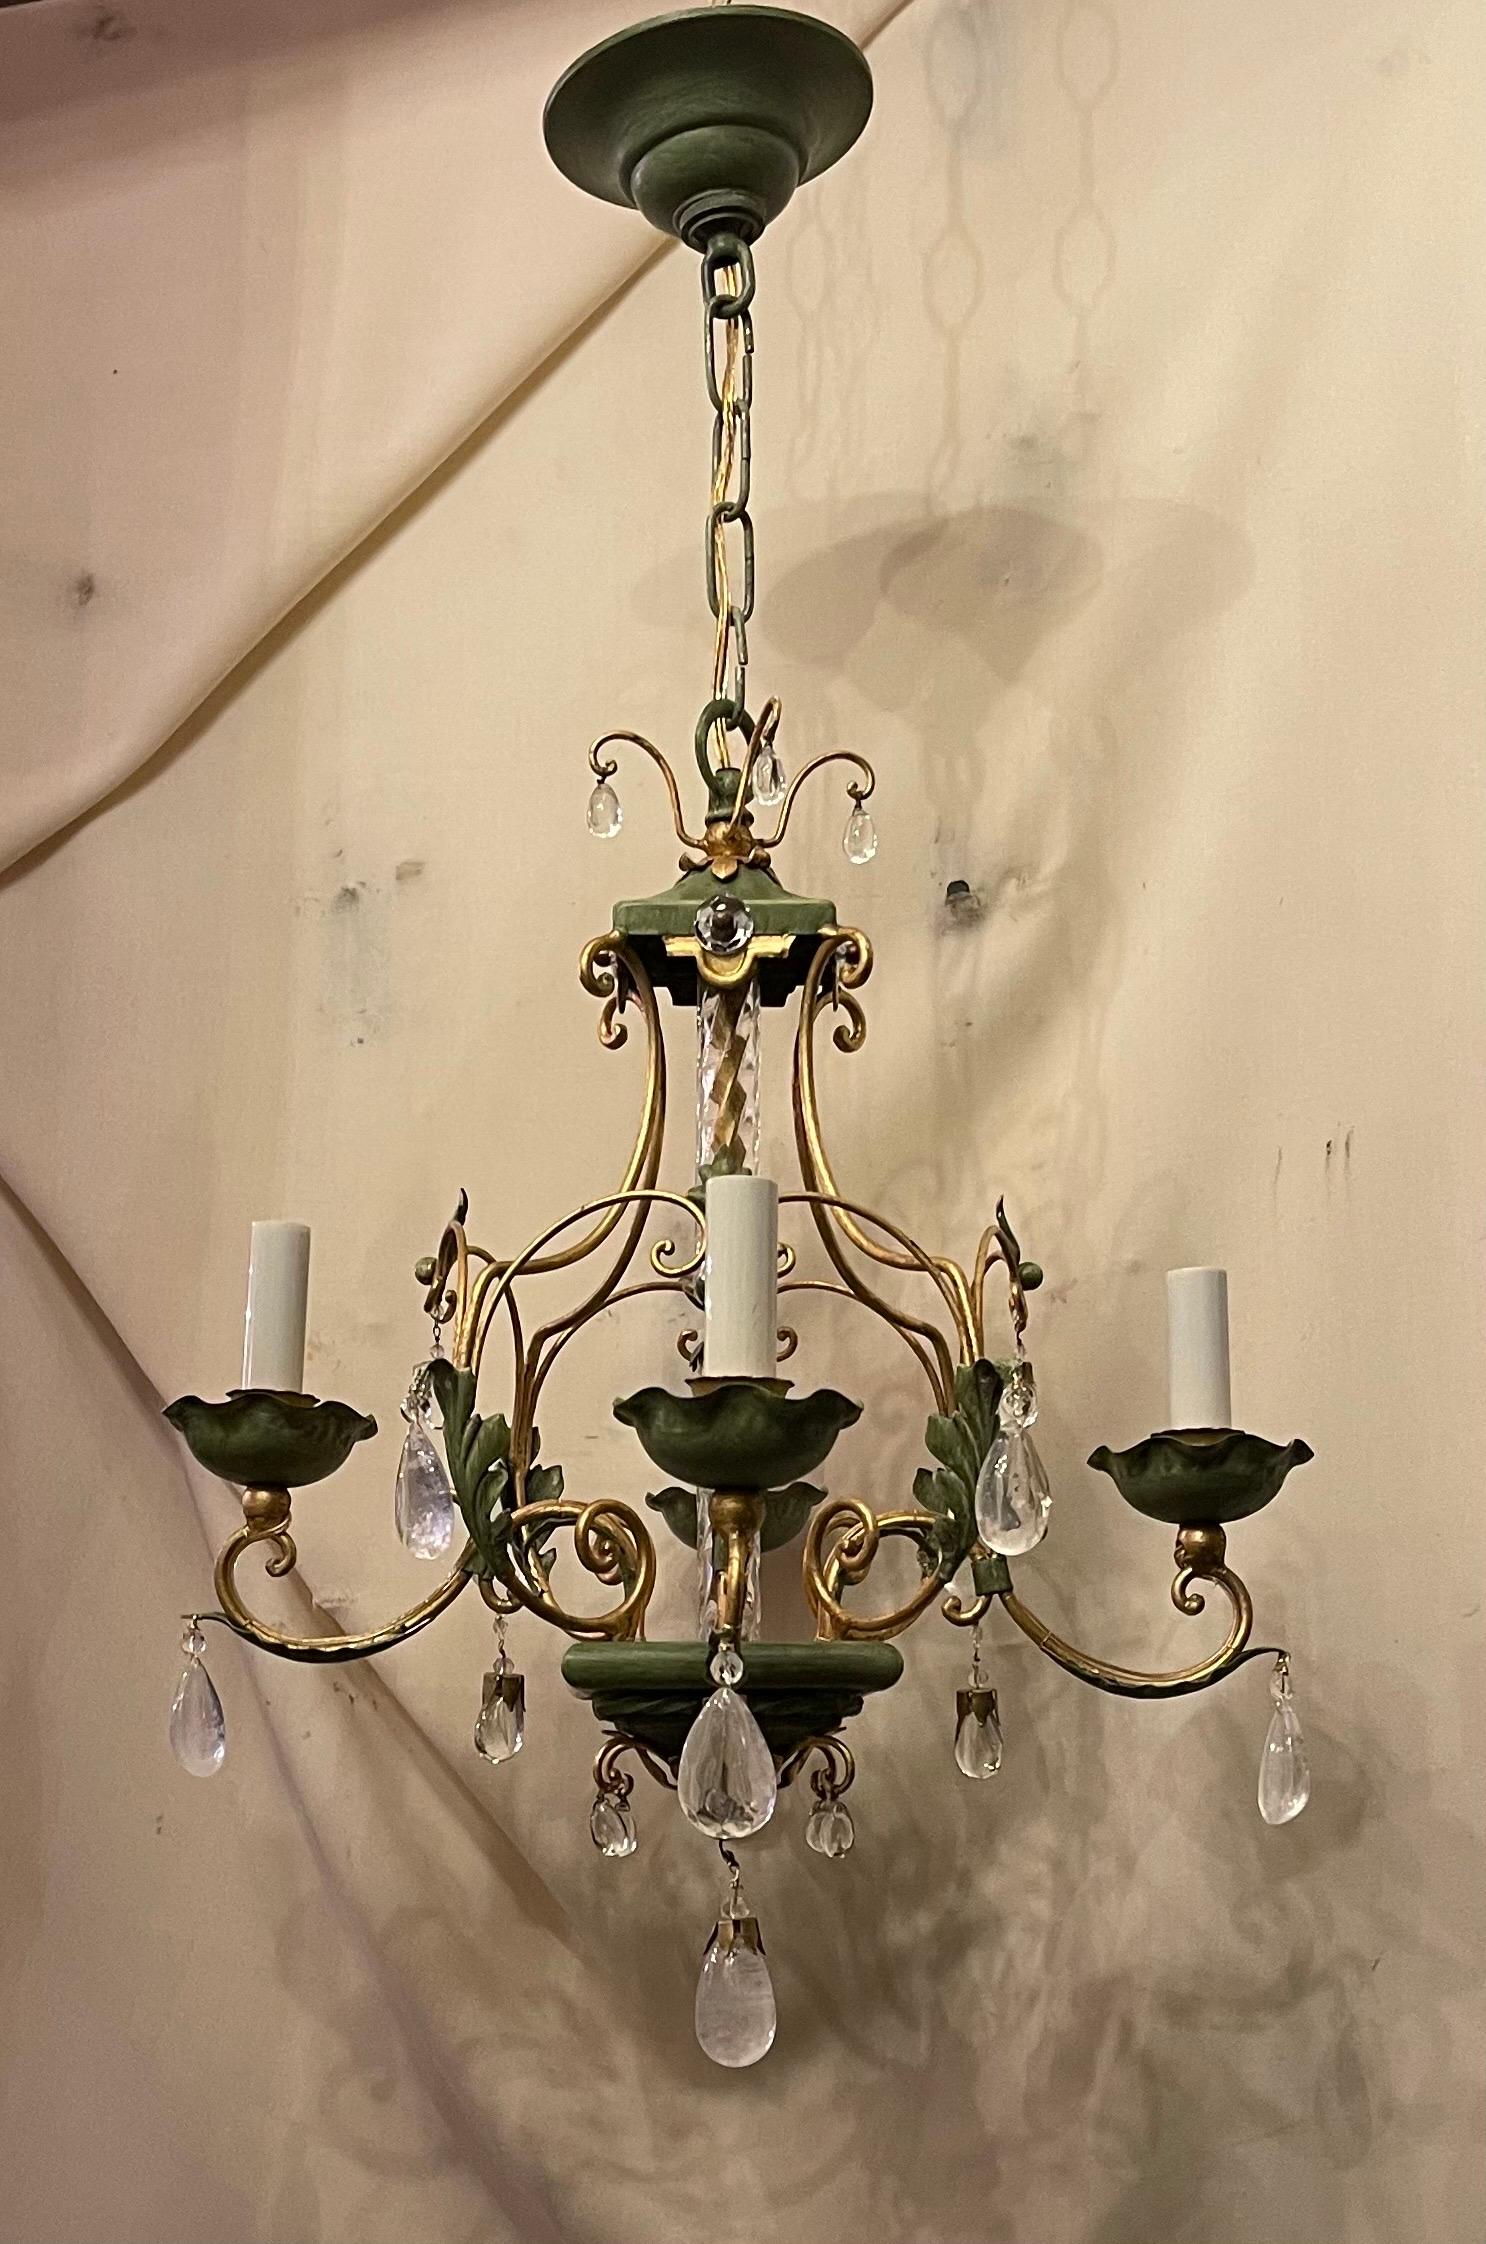 A Wonderful Petite Four Candelabra Light Maison Baguès Style Rock Crystal / Crystal Drop With Beading, Hand Painted Soft Green Tole French Birdcage  Chandelier With Swirl Crystal Center Shaft And Finished With A Rock Crystal Tear Drop.
Completely